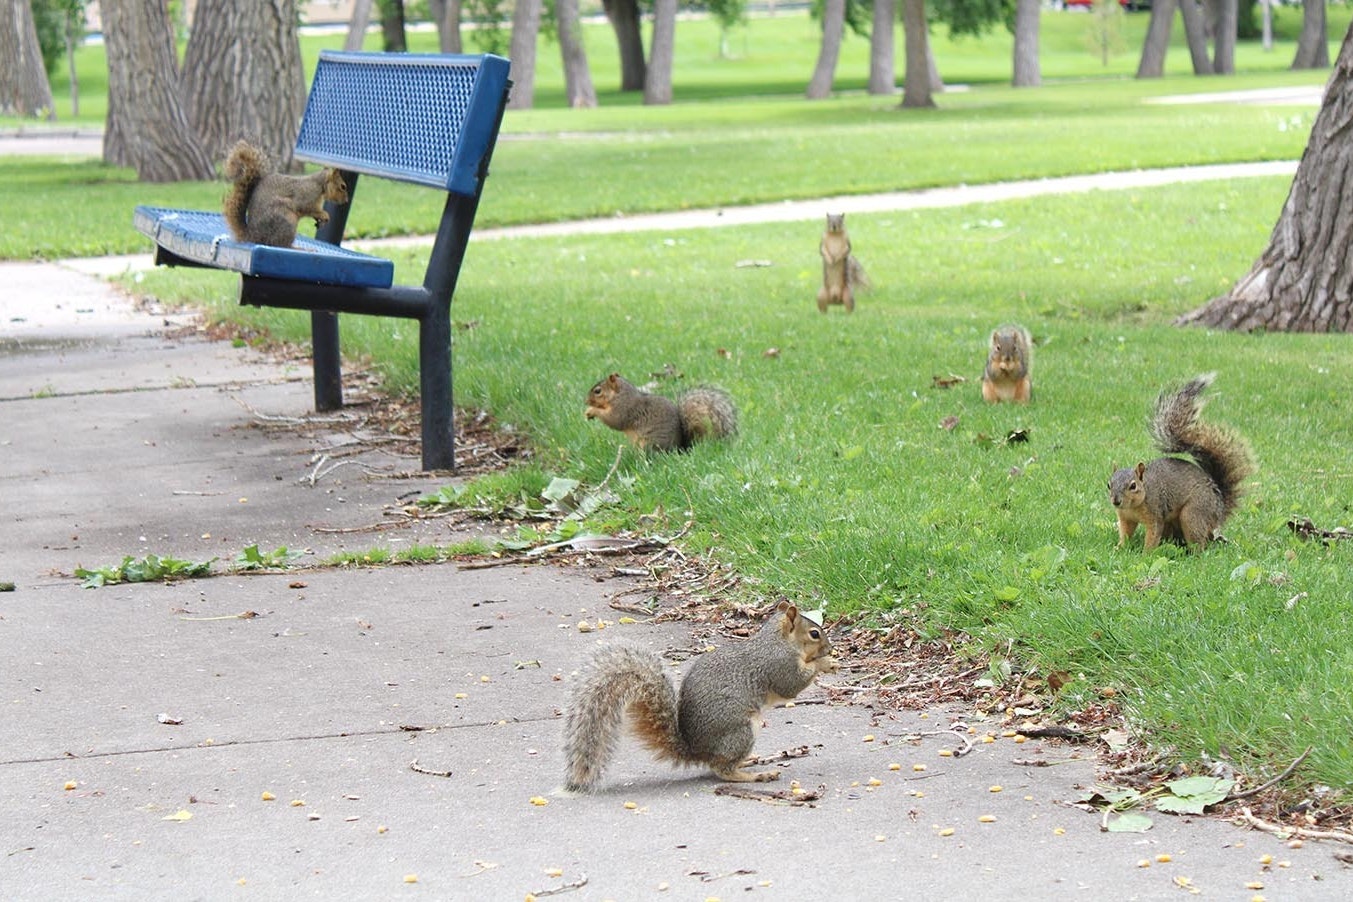 Squirrels find plenty of human-left food at Holiday Park in Cheyenne. The city is going to put up signs asking people to not feed the squirrels, which are becoming more aggressive.